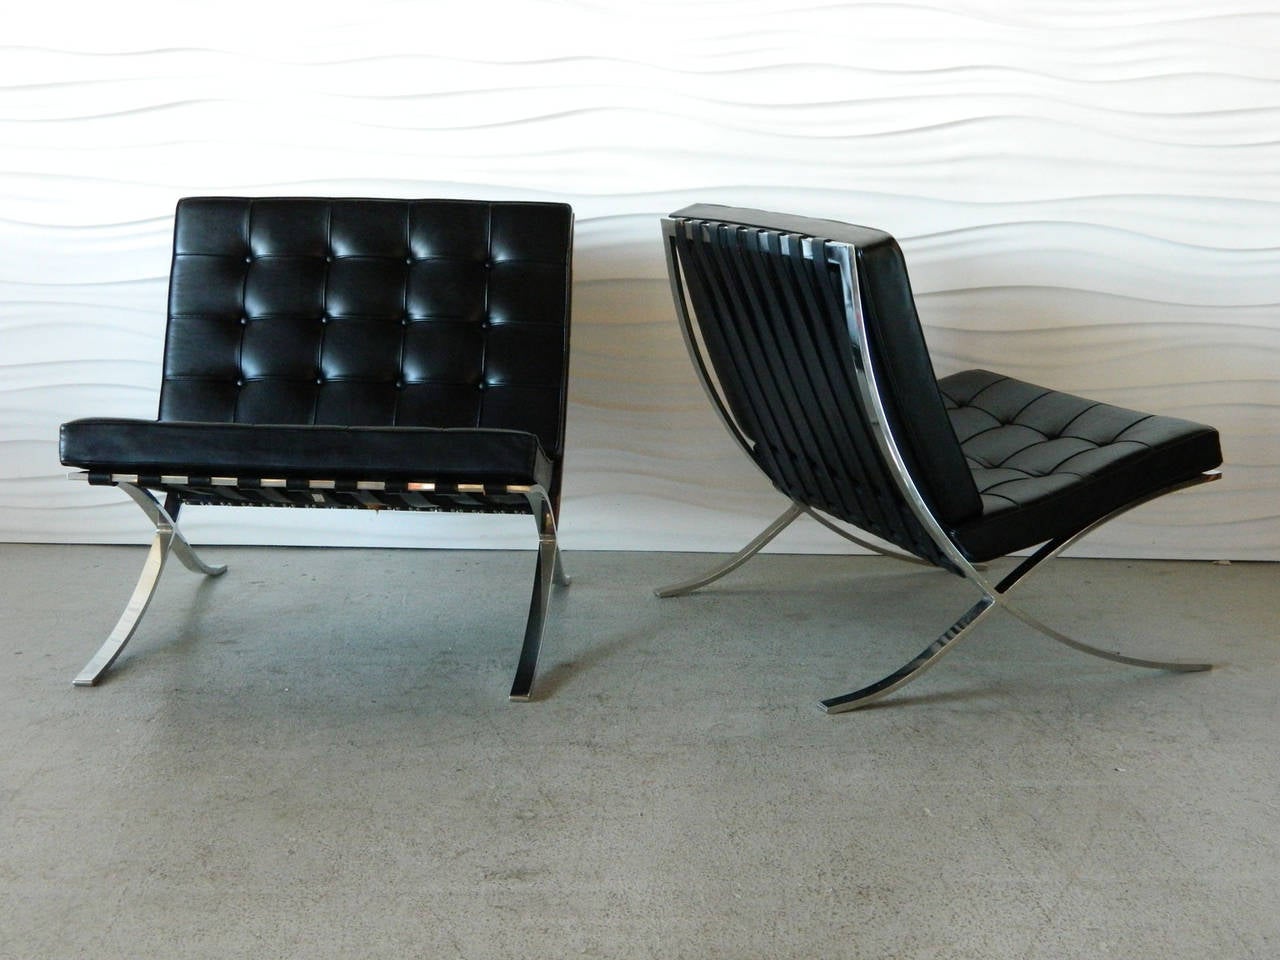 Designed by architect Ludwig Mies van der Rohe, this iconic pair of Barcelona chairs was manufactured by Knoll in the 1960s.